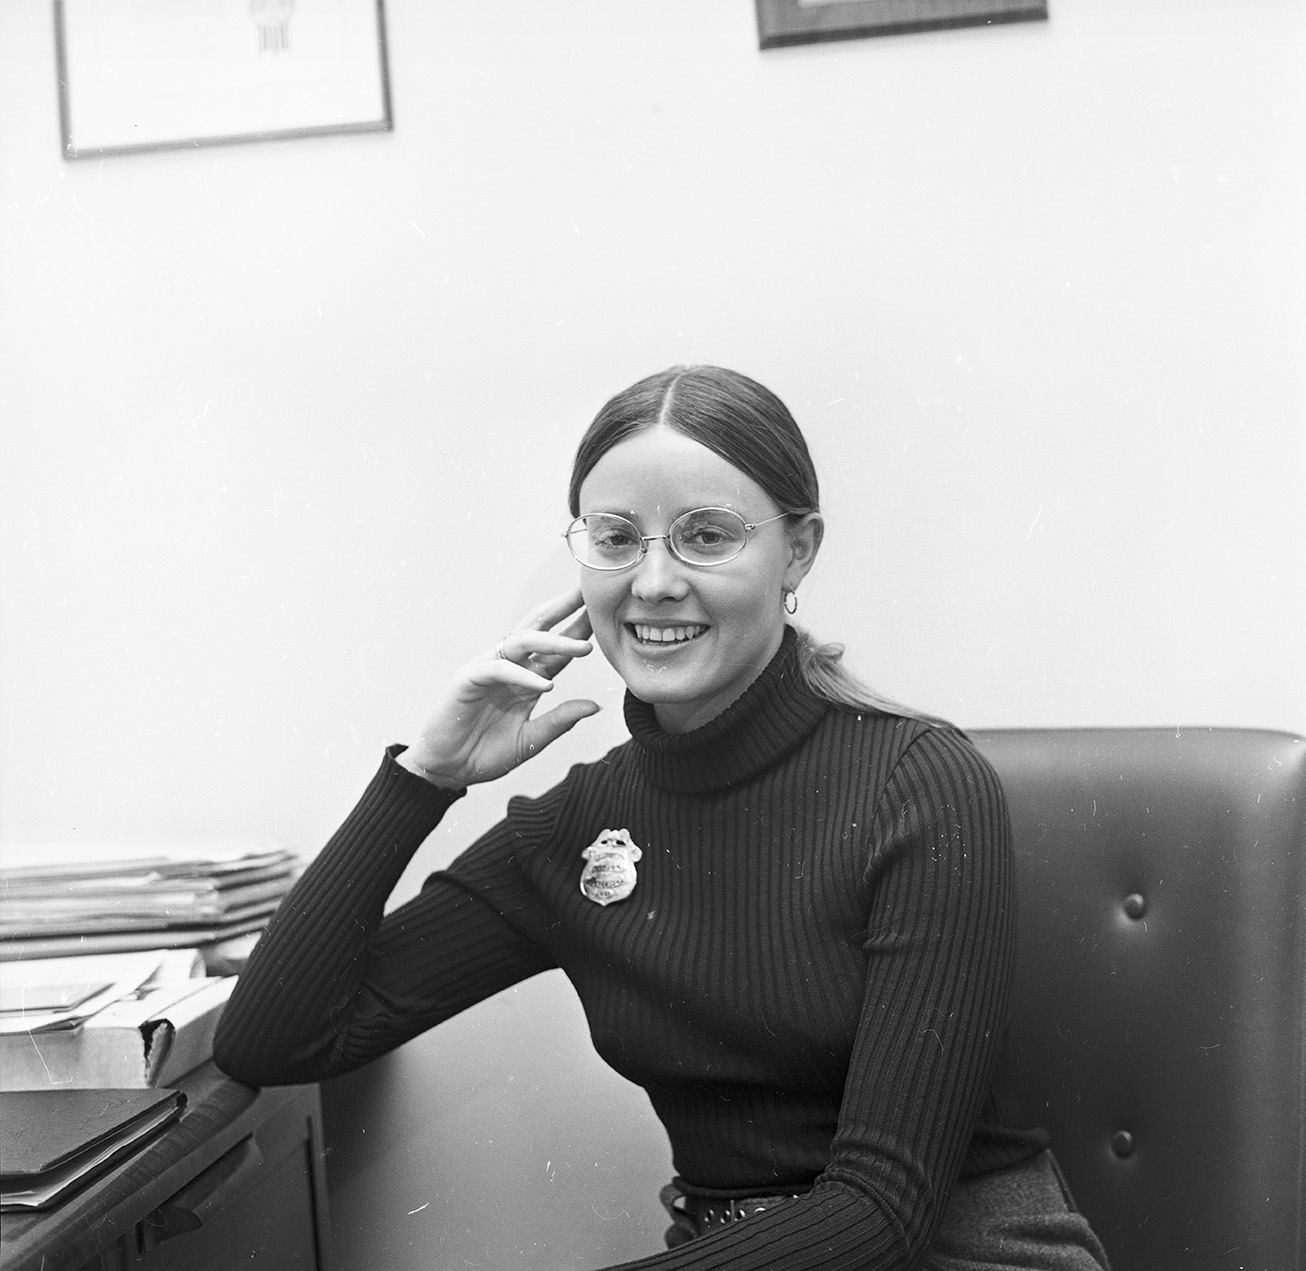 A young woman sits at desk with her elbow on the desk and a police badge on her sweater.